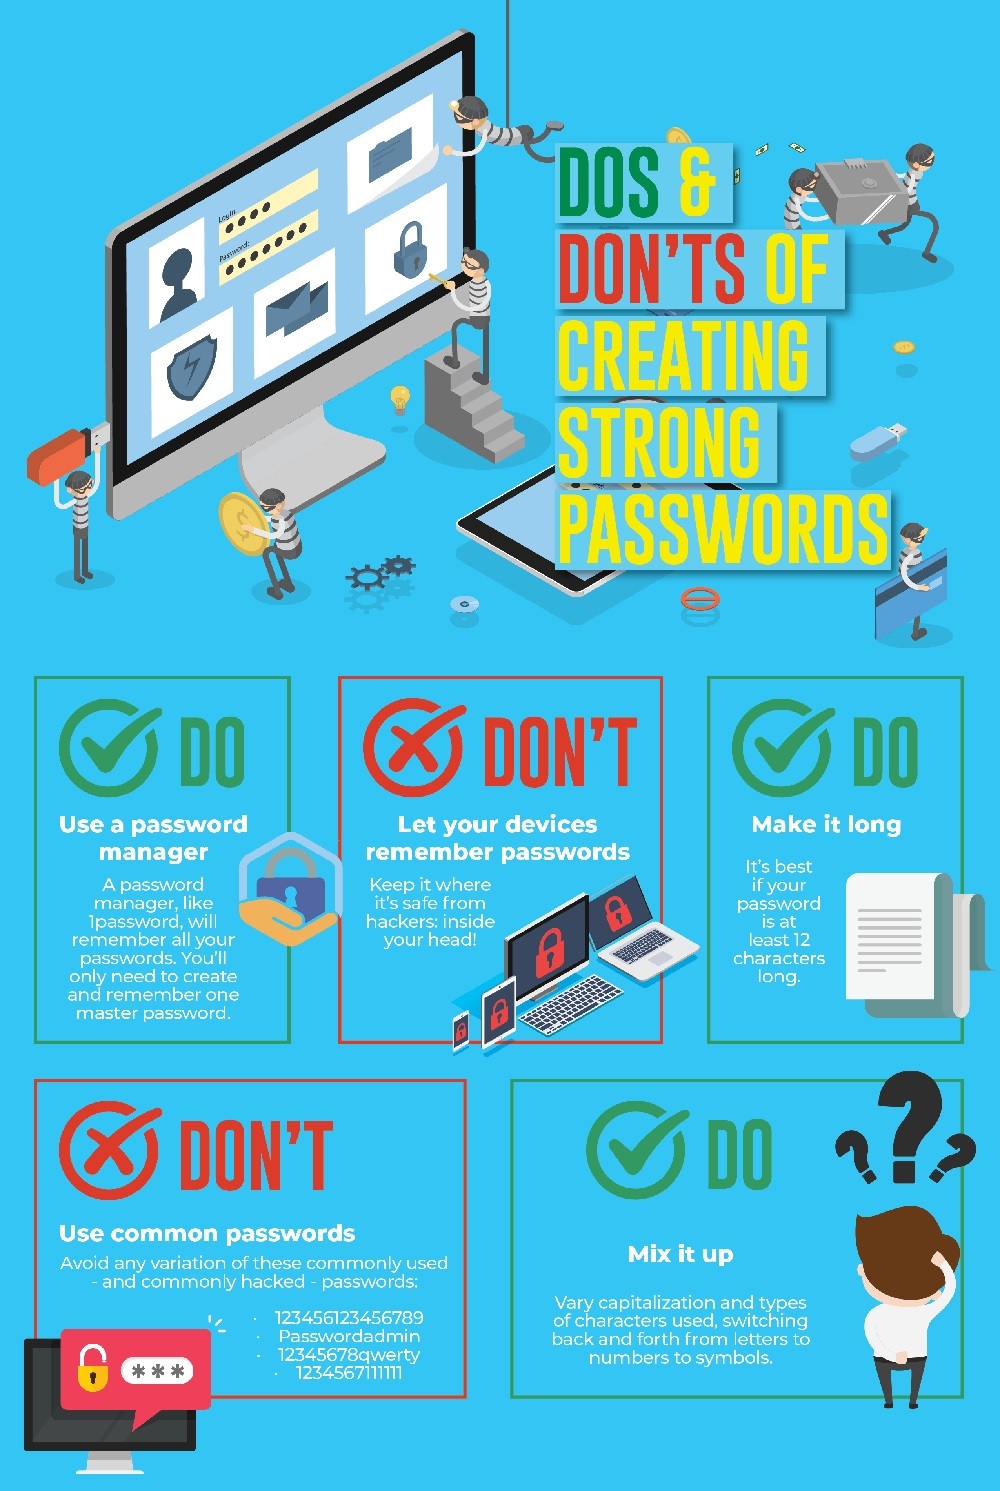 Dos and Don'ts of creating strong passwords 